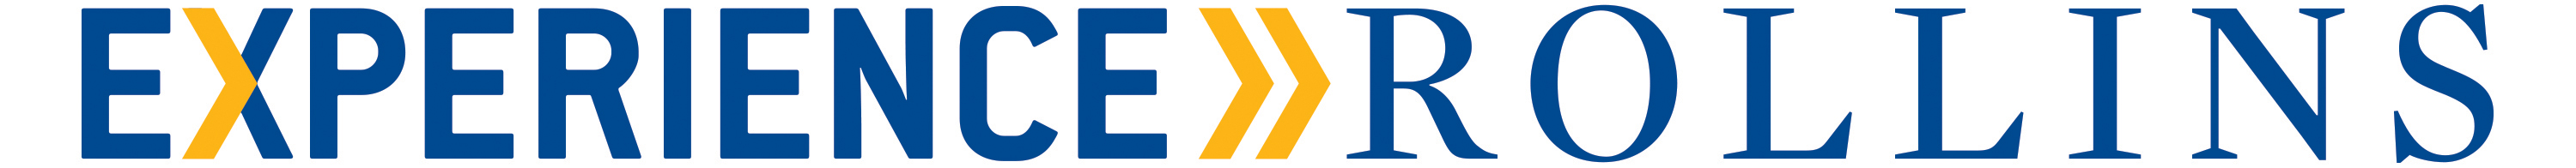 Experience Rollins logo